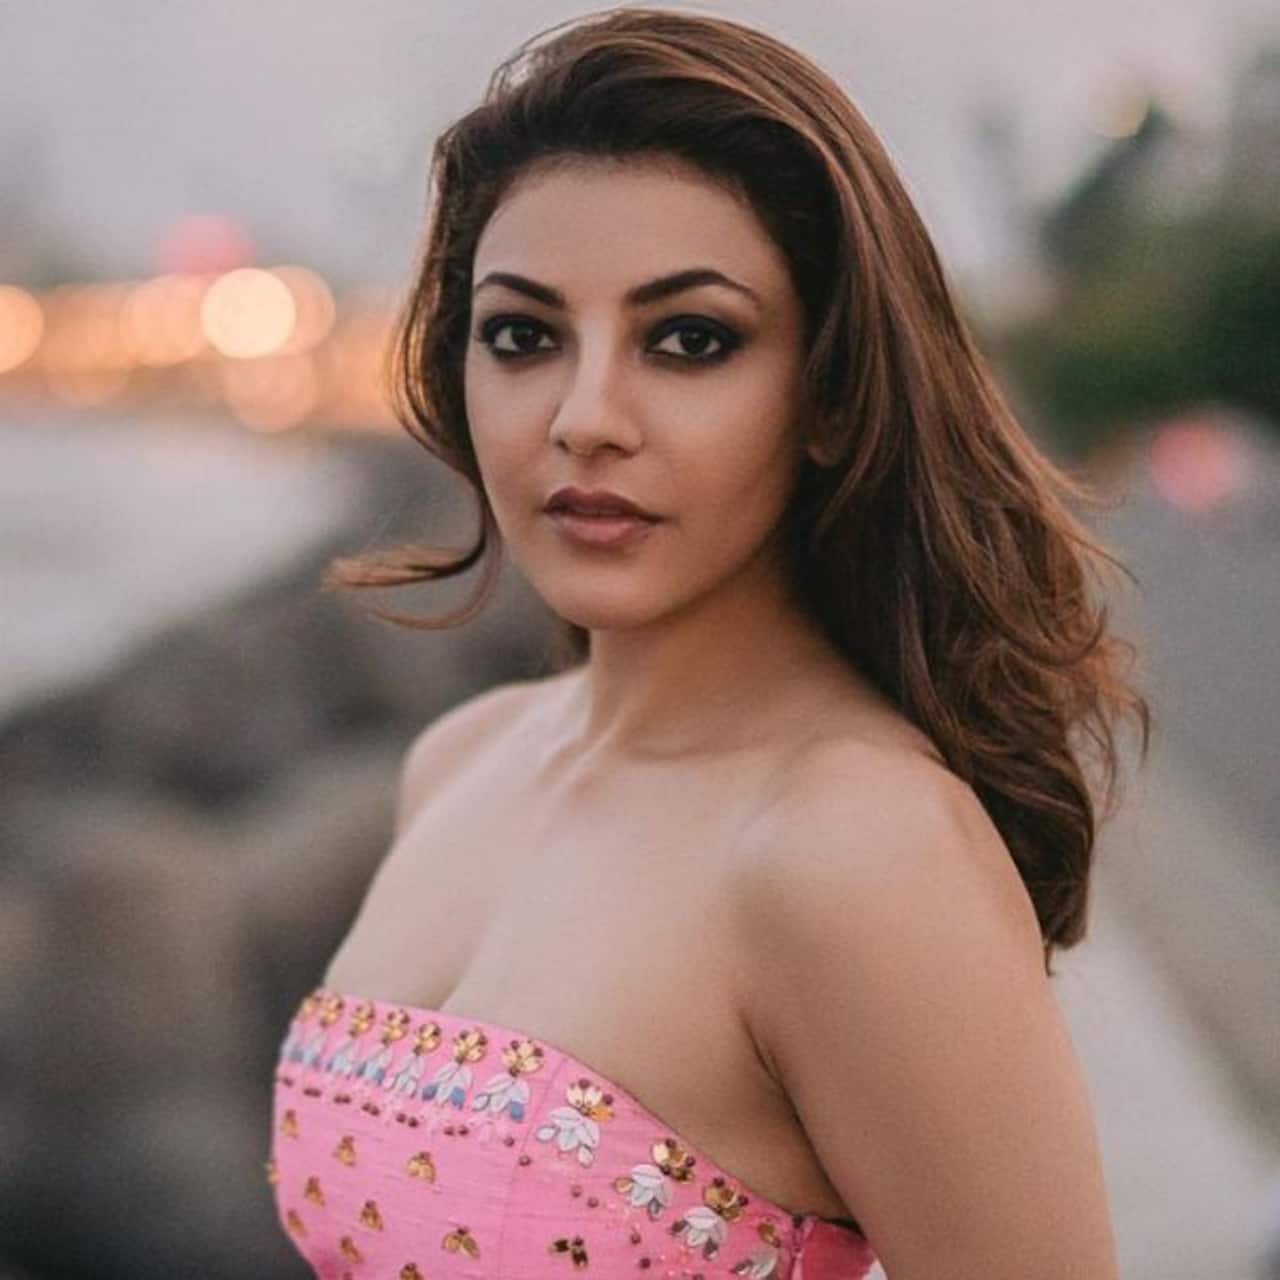 Kajal Aggarwal fan pays Rs 60 lakh to meet the actress, gets cheated by fraudsters - read details